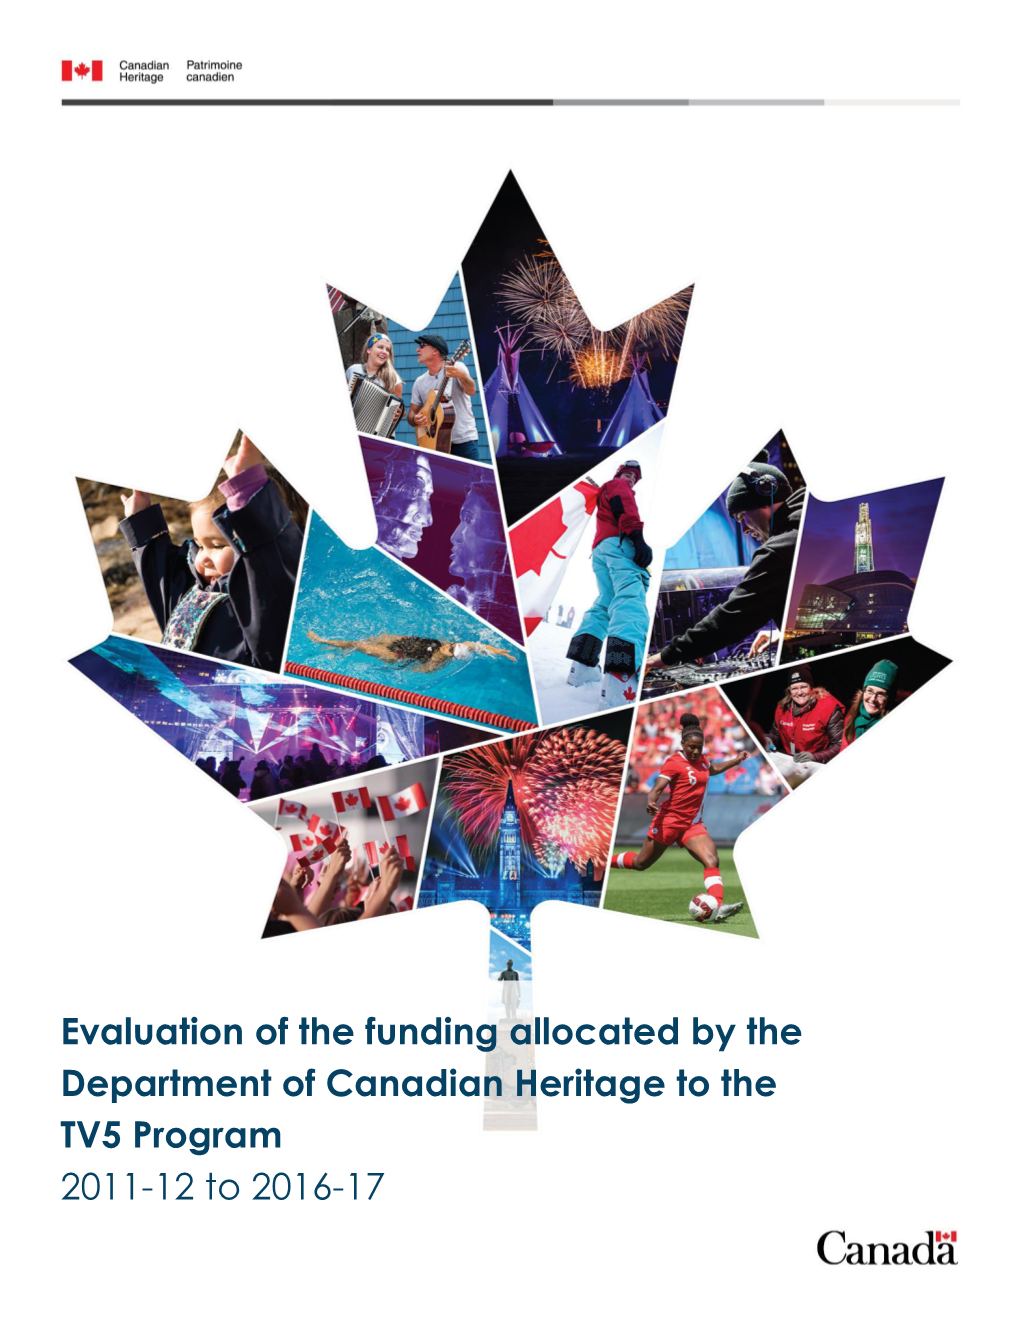 Evaluation of the Funding Allocated by the Department of Canadian Heritage to the TV5 Program 2011-12 to 2016-17